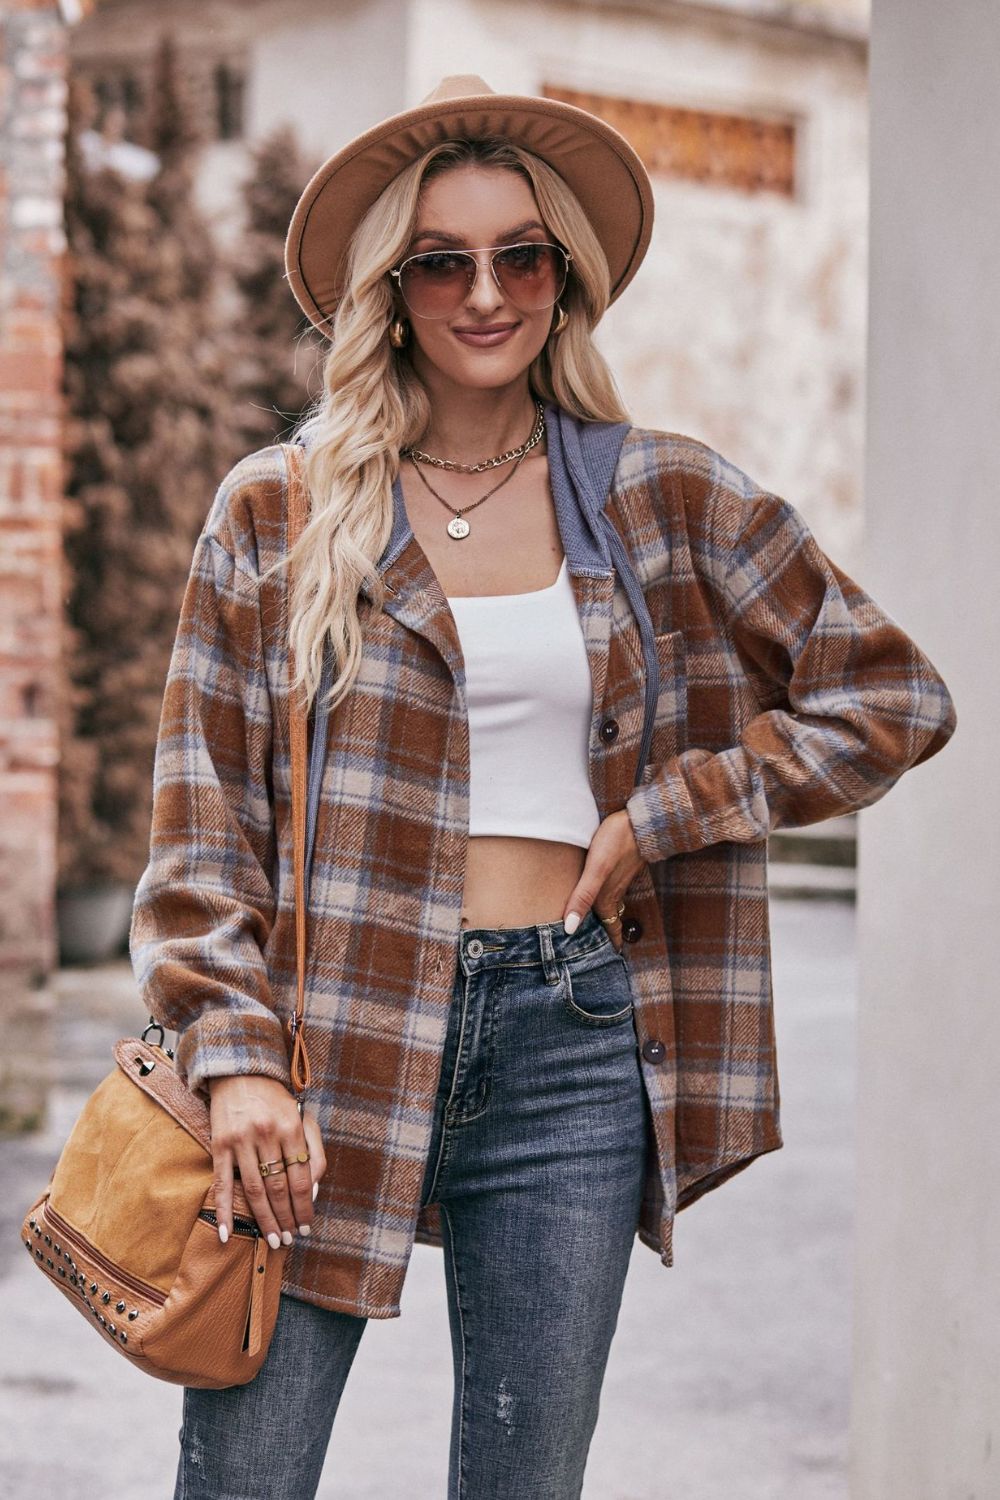 Women's Jacket with Plaid Dropped Shoulder Hood and Longline Length